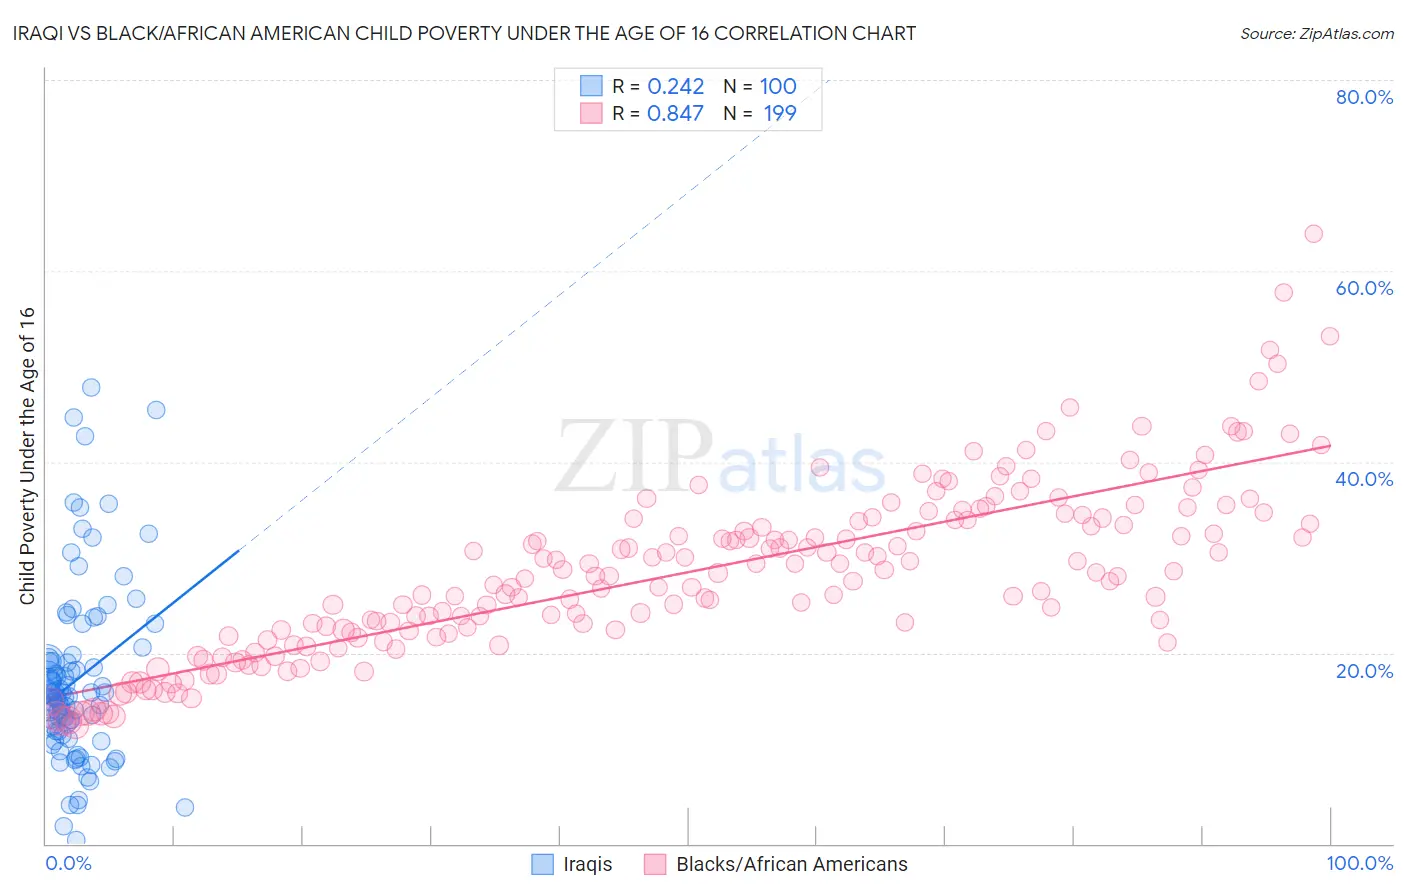 Iraqi vs Black/African American Child Poverty Under the Age of 16